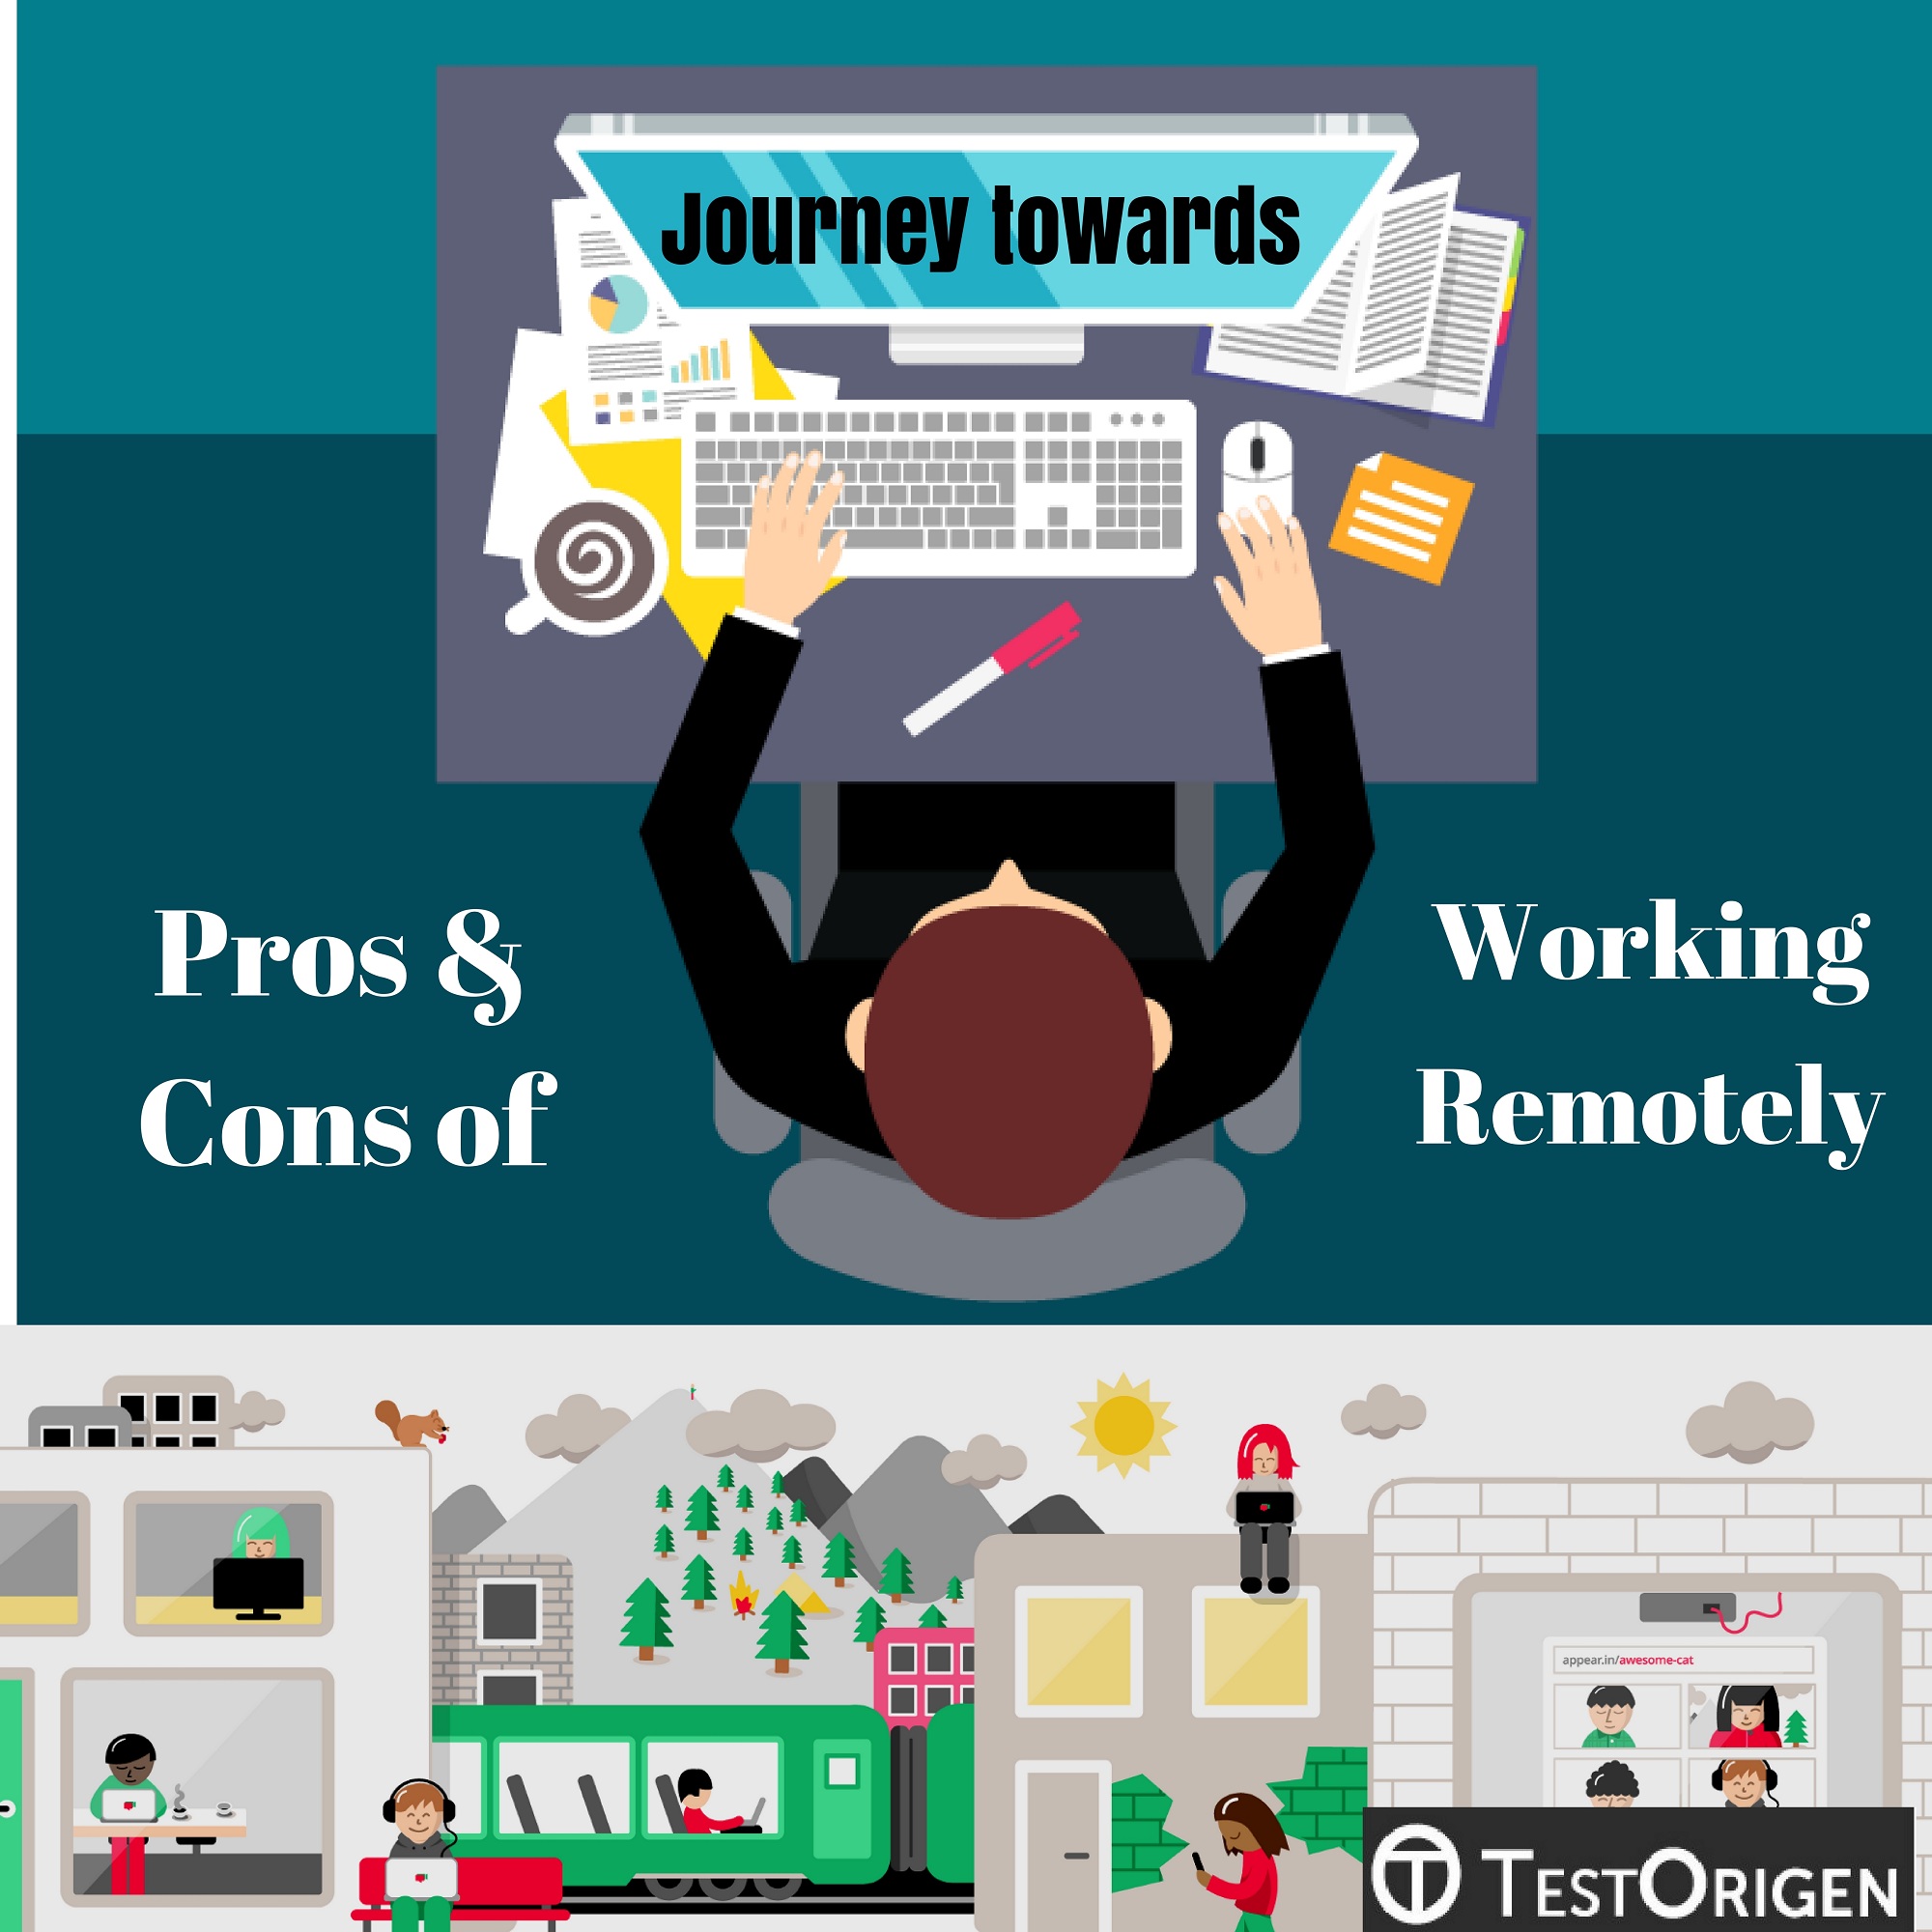 Journey towards Pros & Cons of Working Remotely